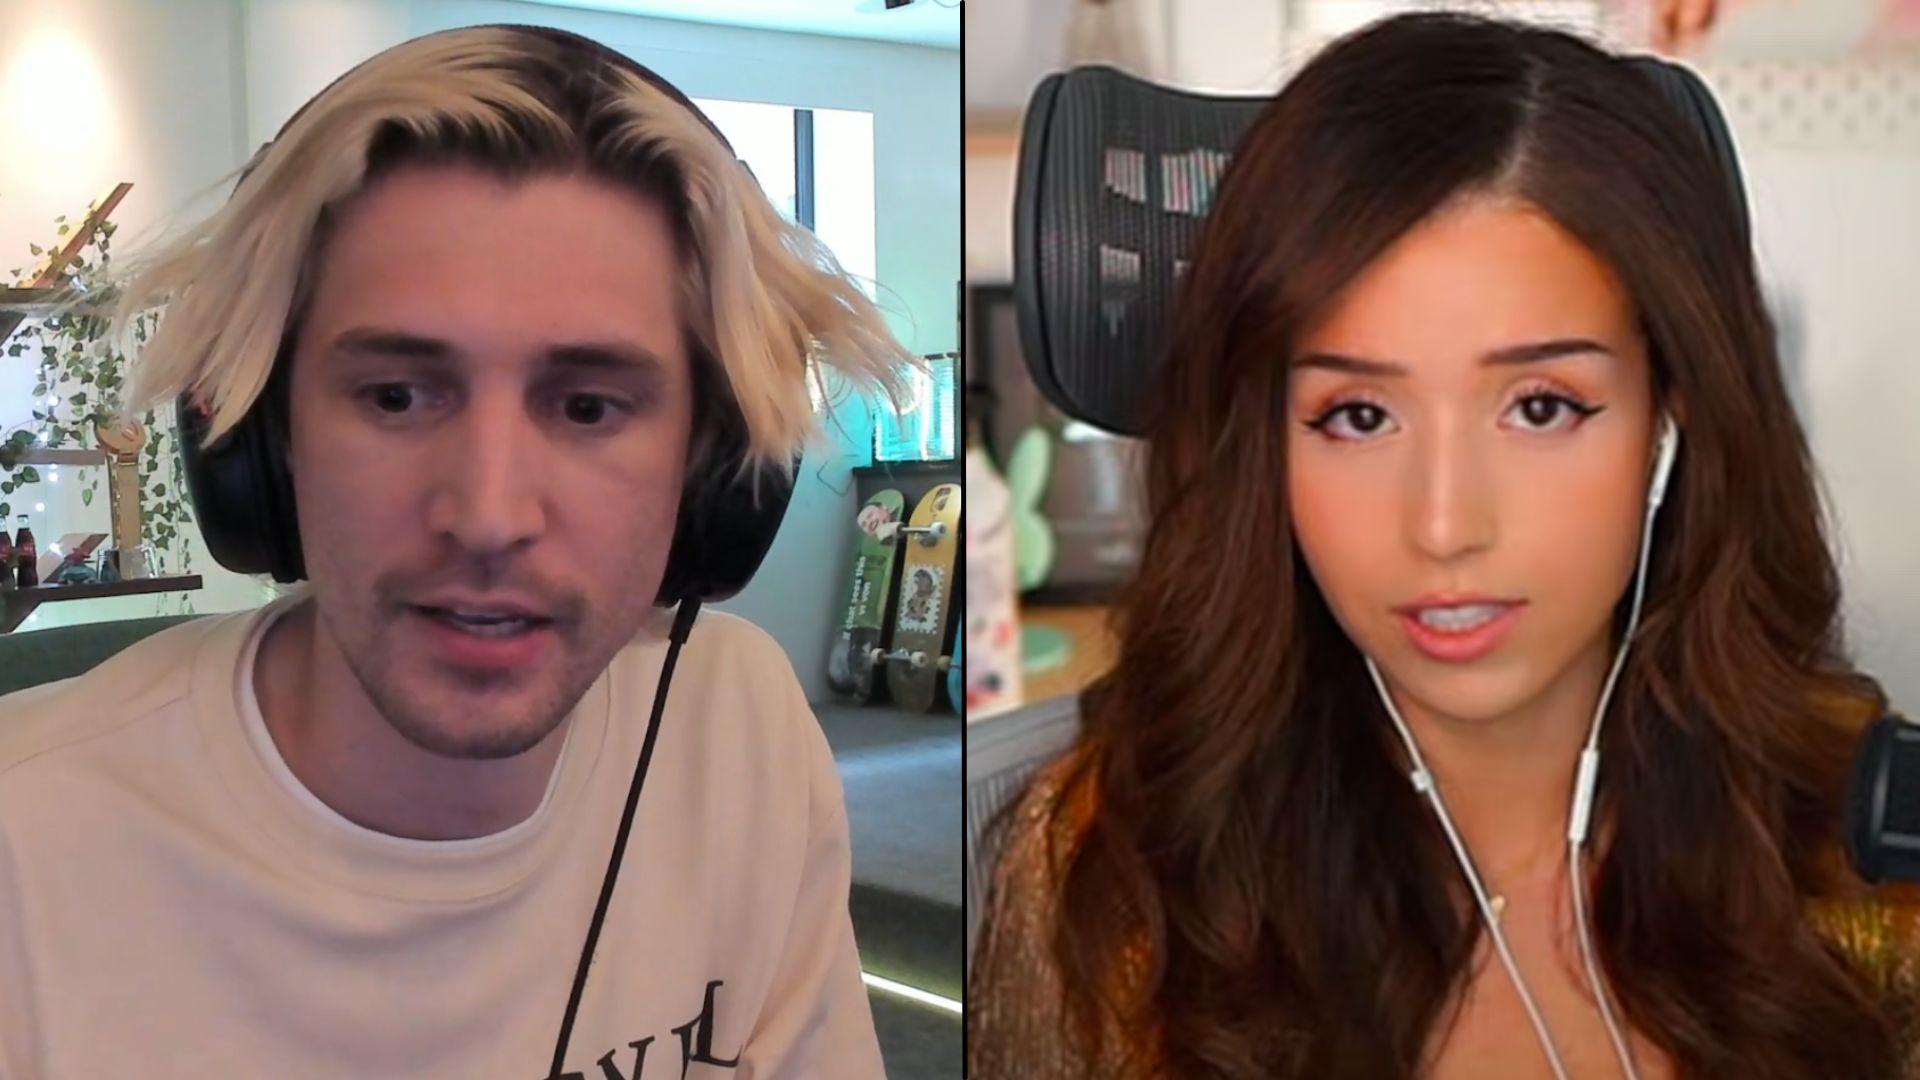 xQc and Pokimane side-by-side looking and talking to camera